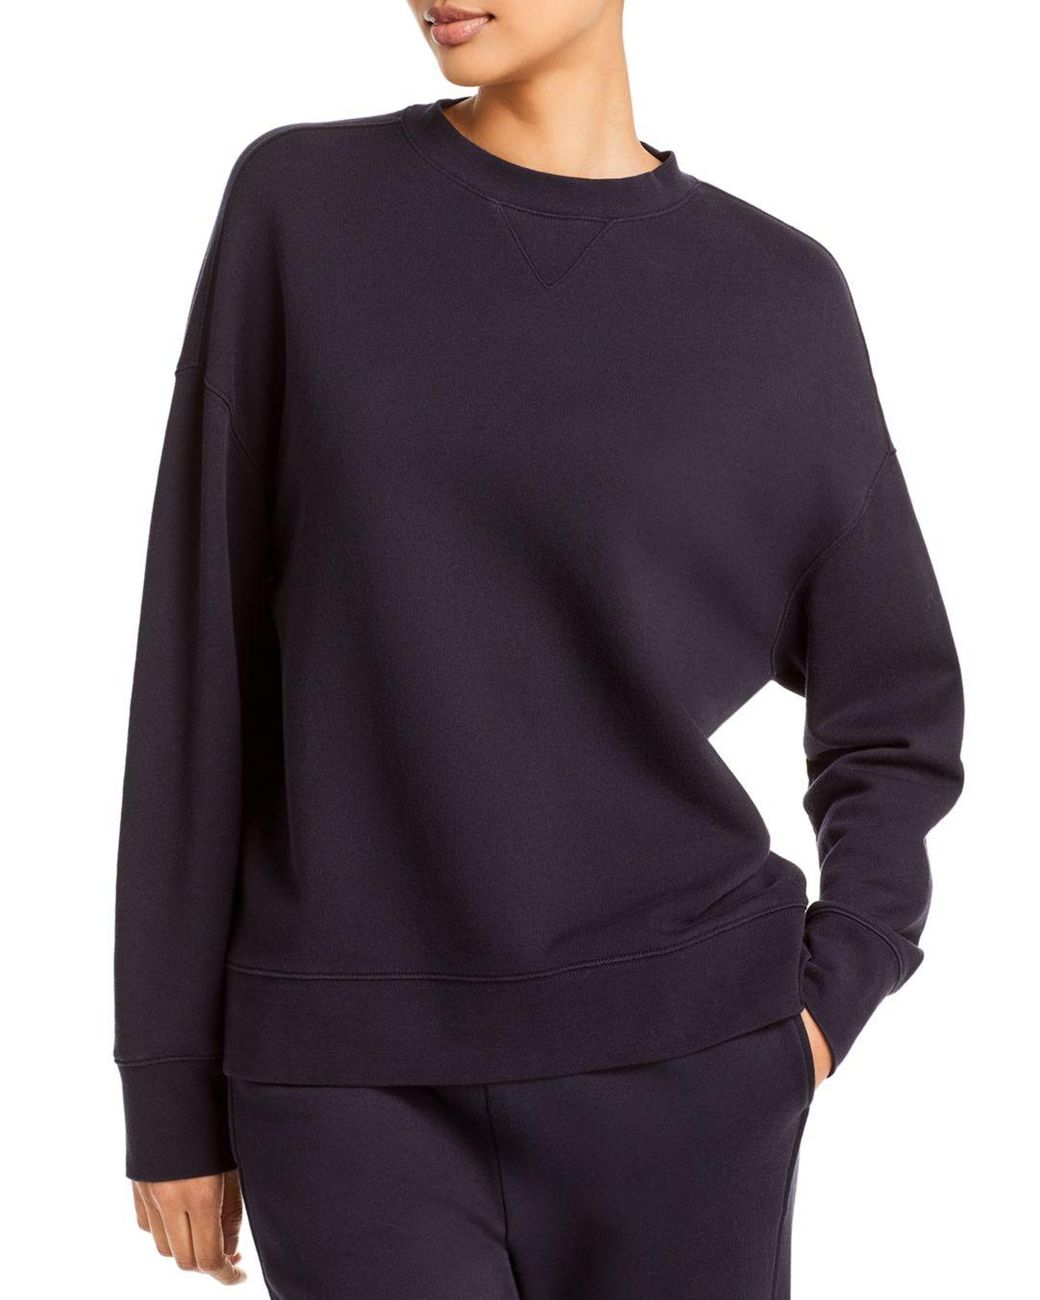 Vince Cotton Essential Relaxed Sweatshirt in Black - Lyst